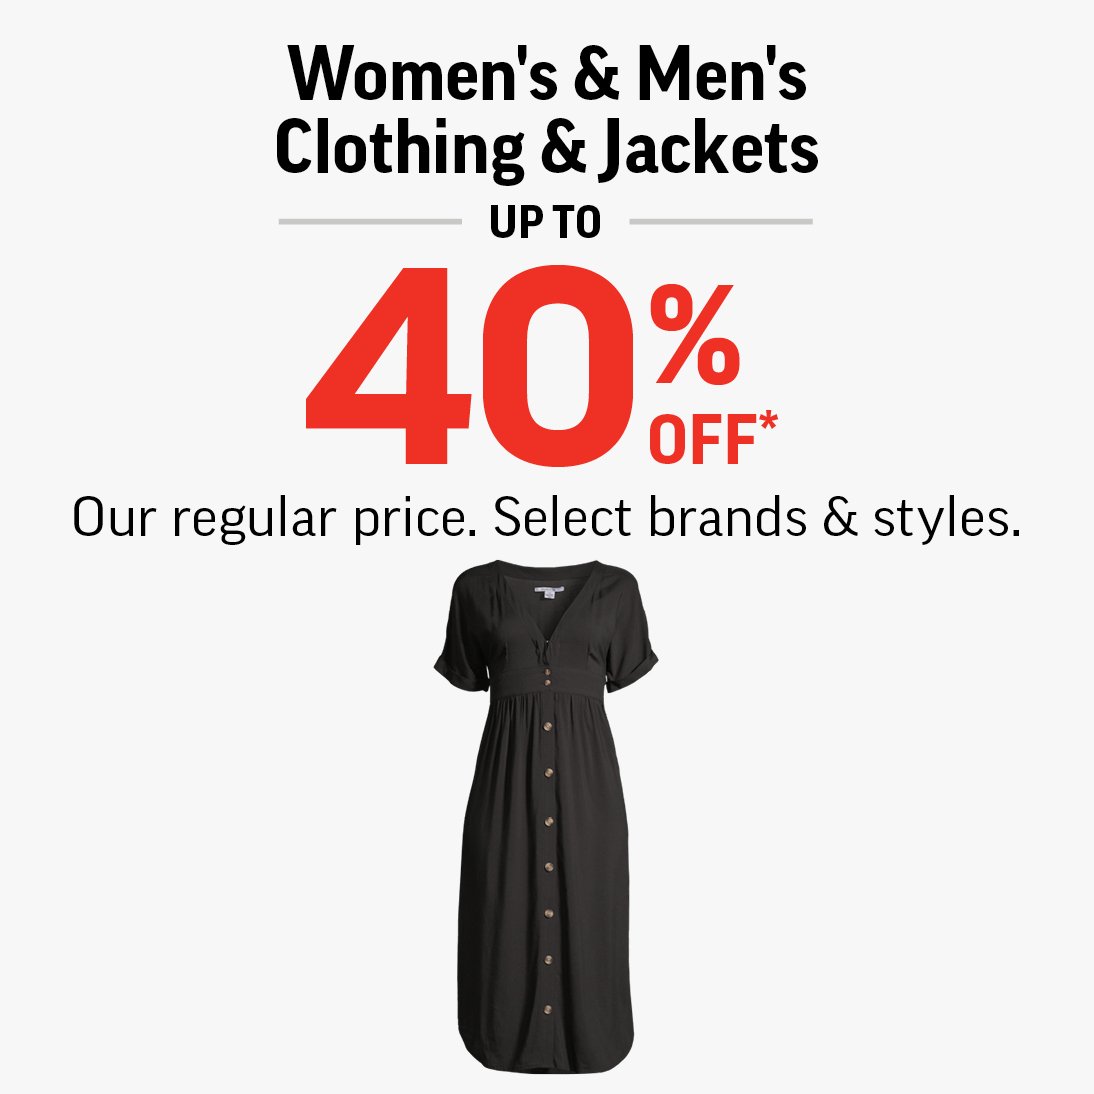 WOMEN'S & MEN'S CLOTHING & JACKETS UP TO 40% OFF